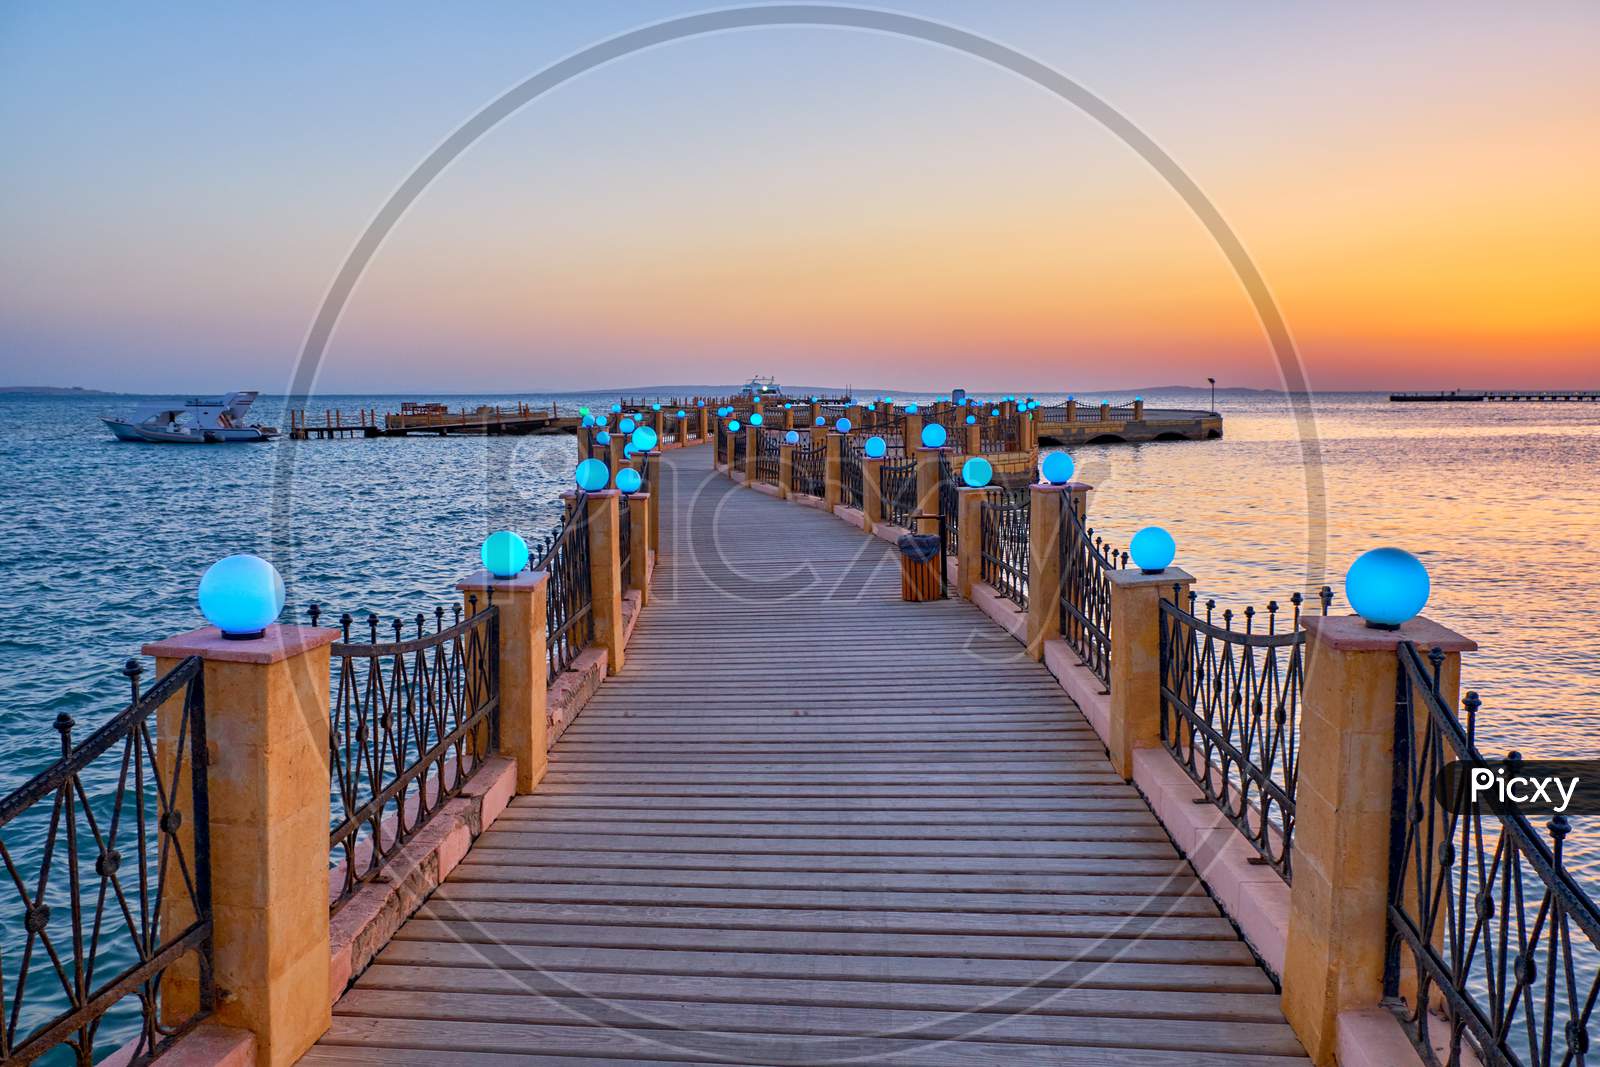 View Of The Promenade Boardwalk Over The Red Sea During Sunrise In Hurghada, Egypt